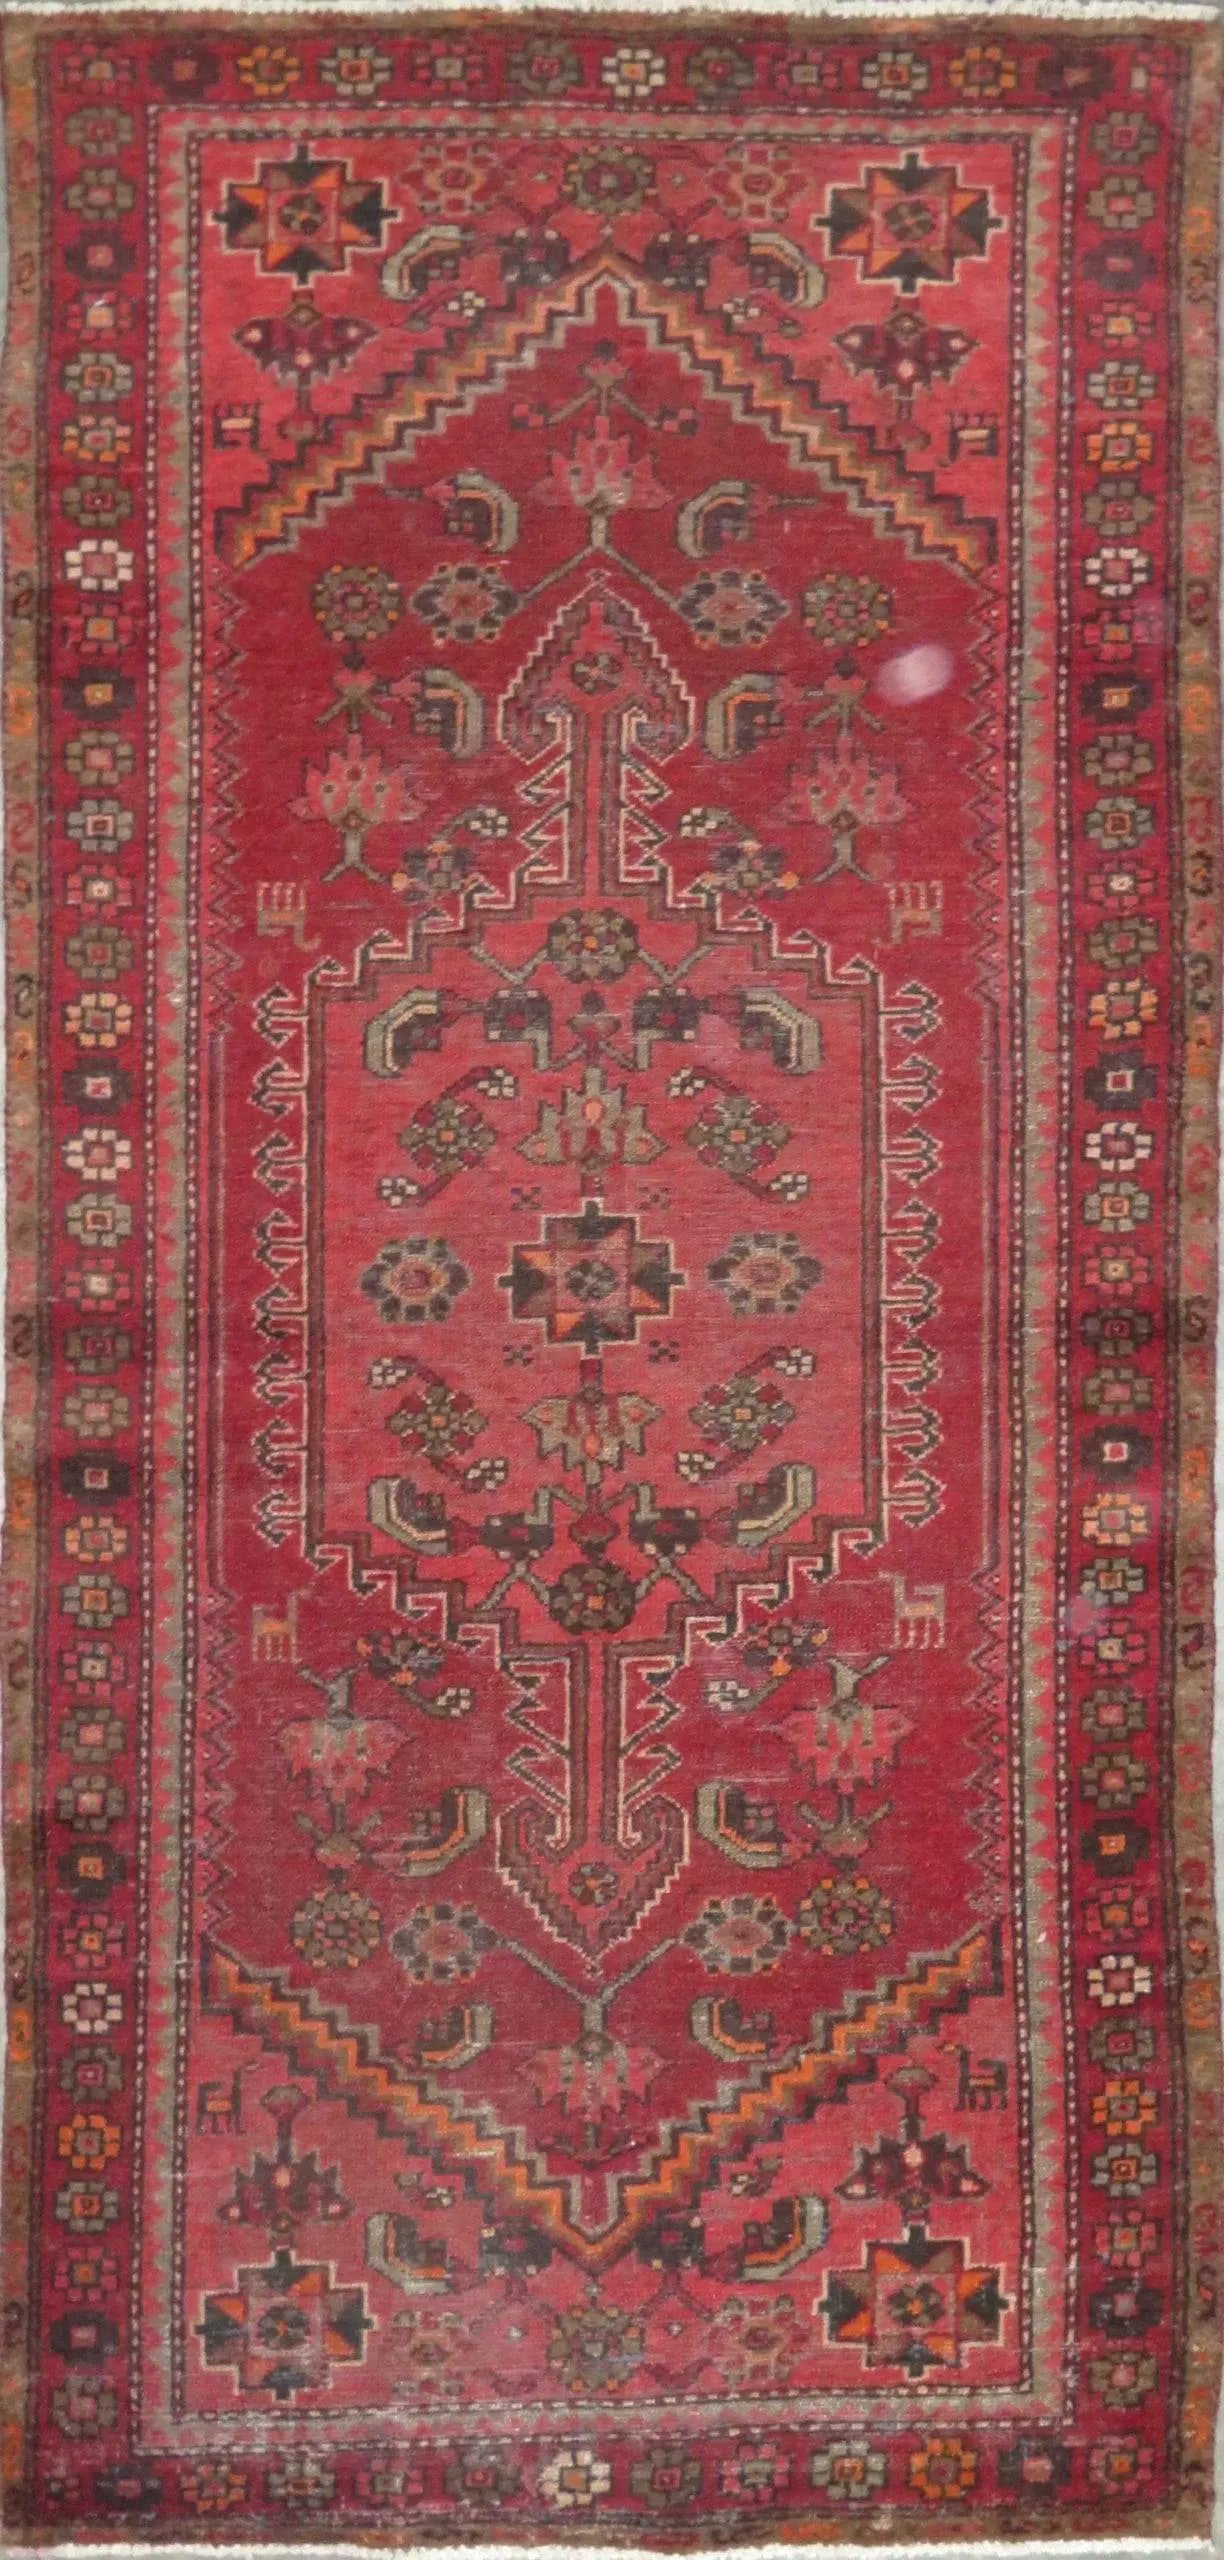 Hand-Knotted Persian Wool Rug _ Luxurious Vintage Design, 6'2" x 2'10", Artisan Crafted